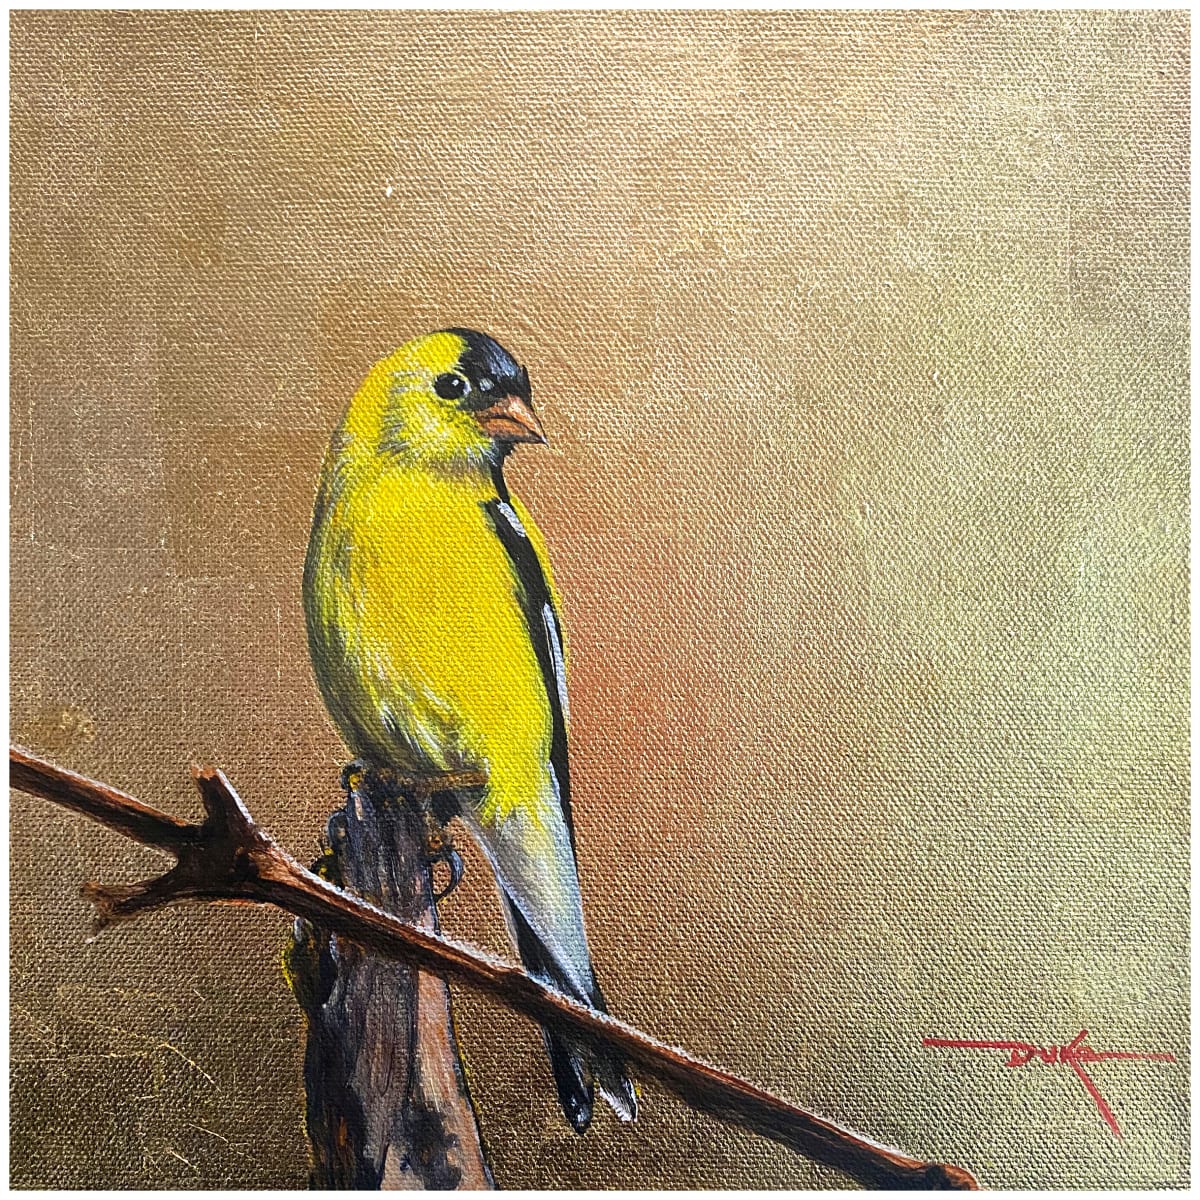 American Goldfinch by Duke Windsor  Image: An American Goldfinch hears a noise in the distance and keeps a watchful eye.